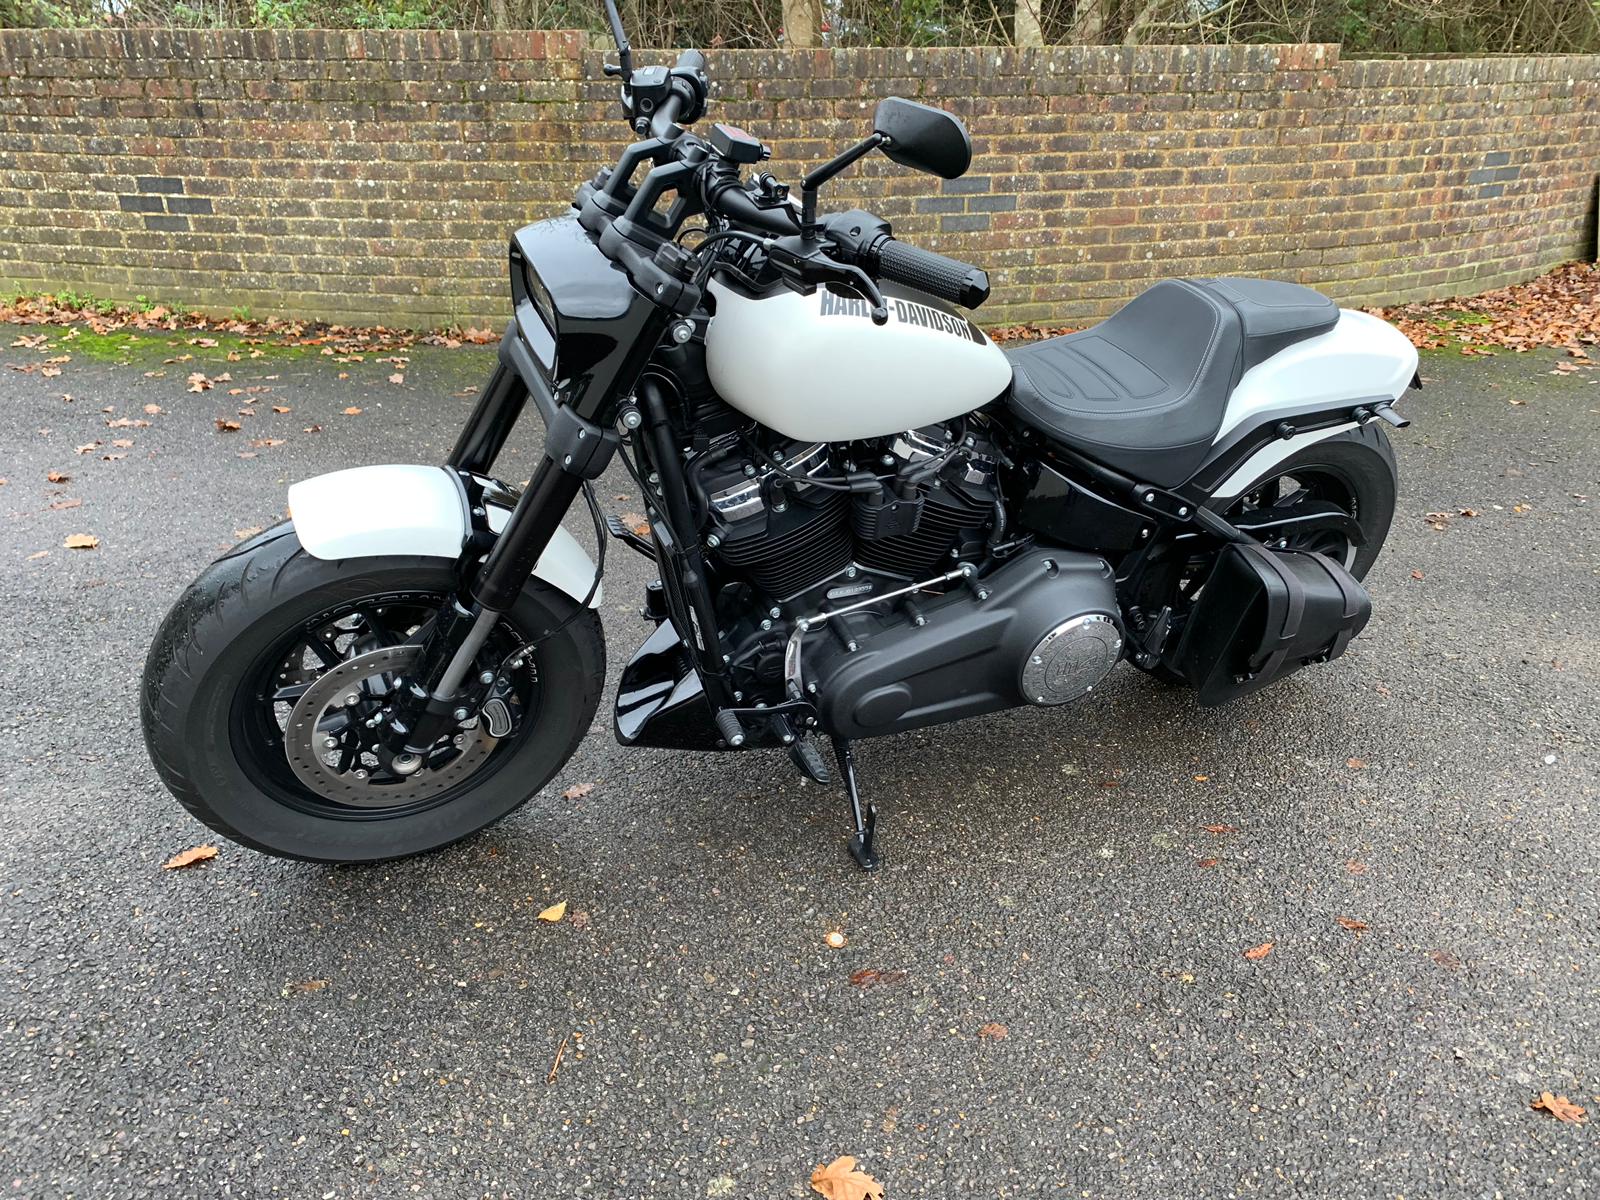 2018/19 softail chin spoiler / belly pan